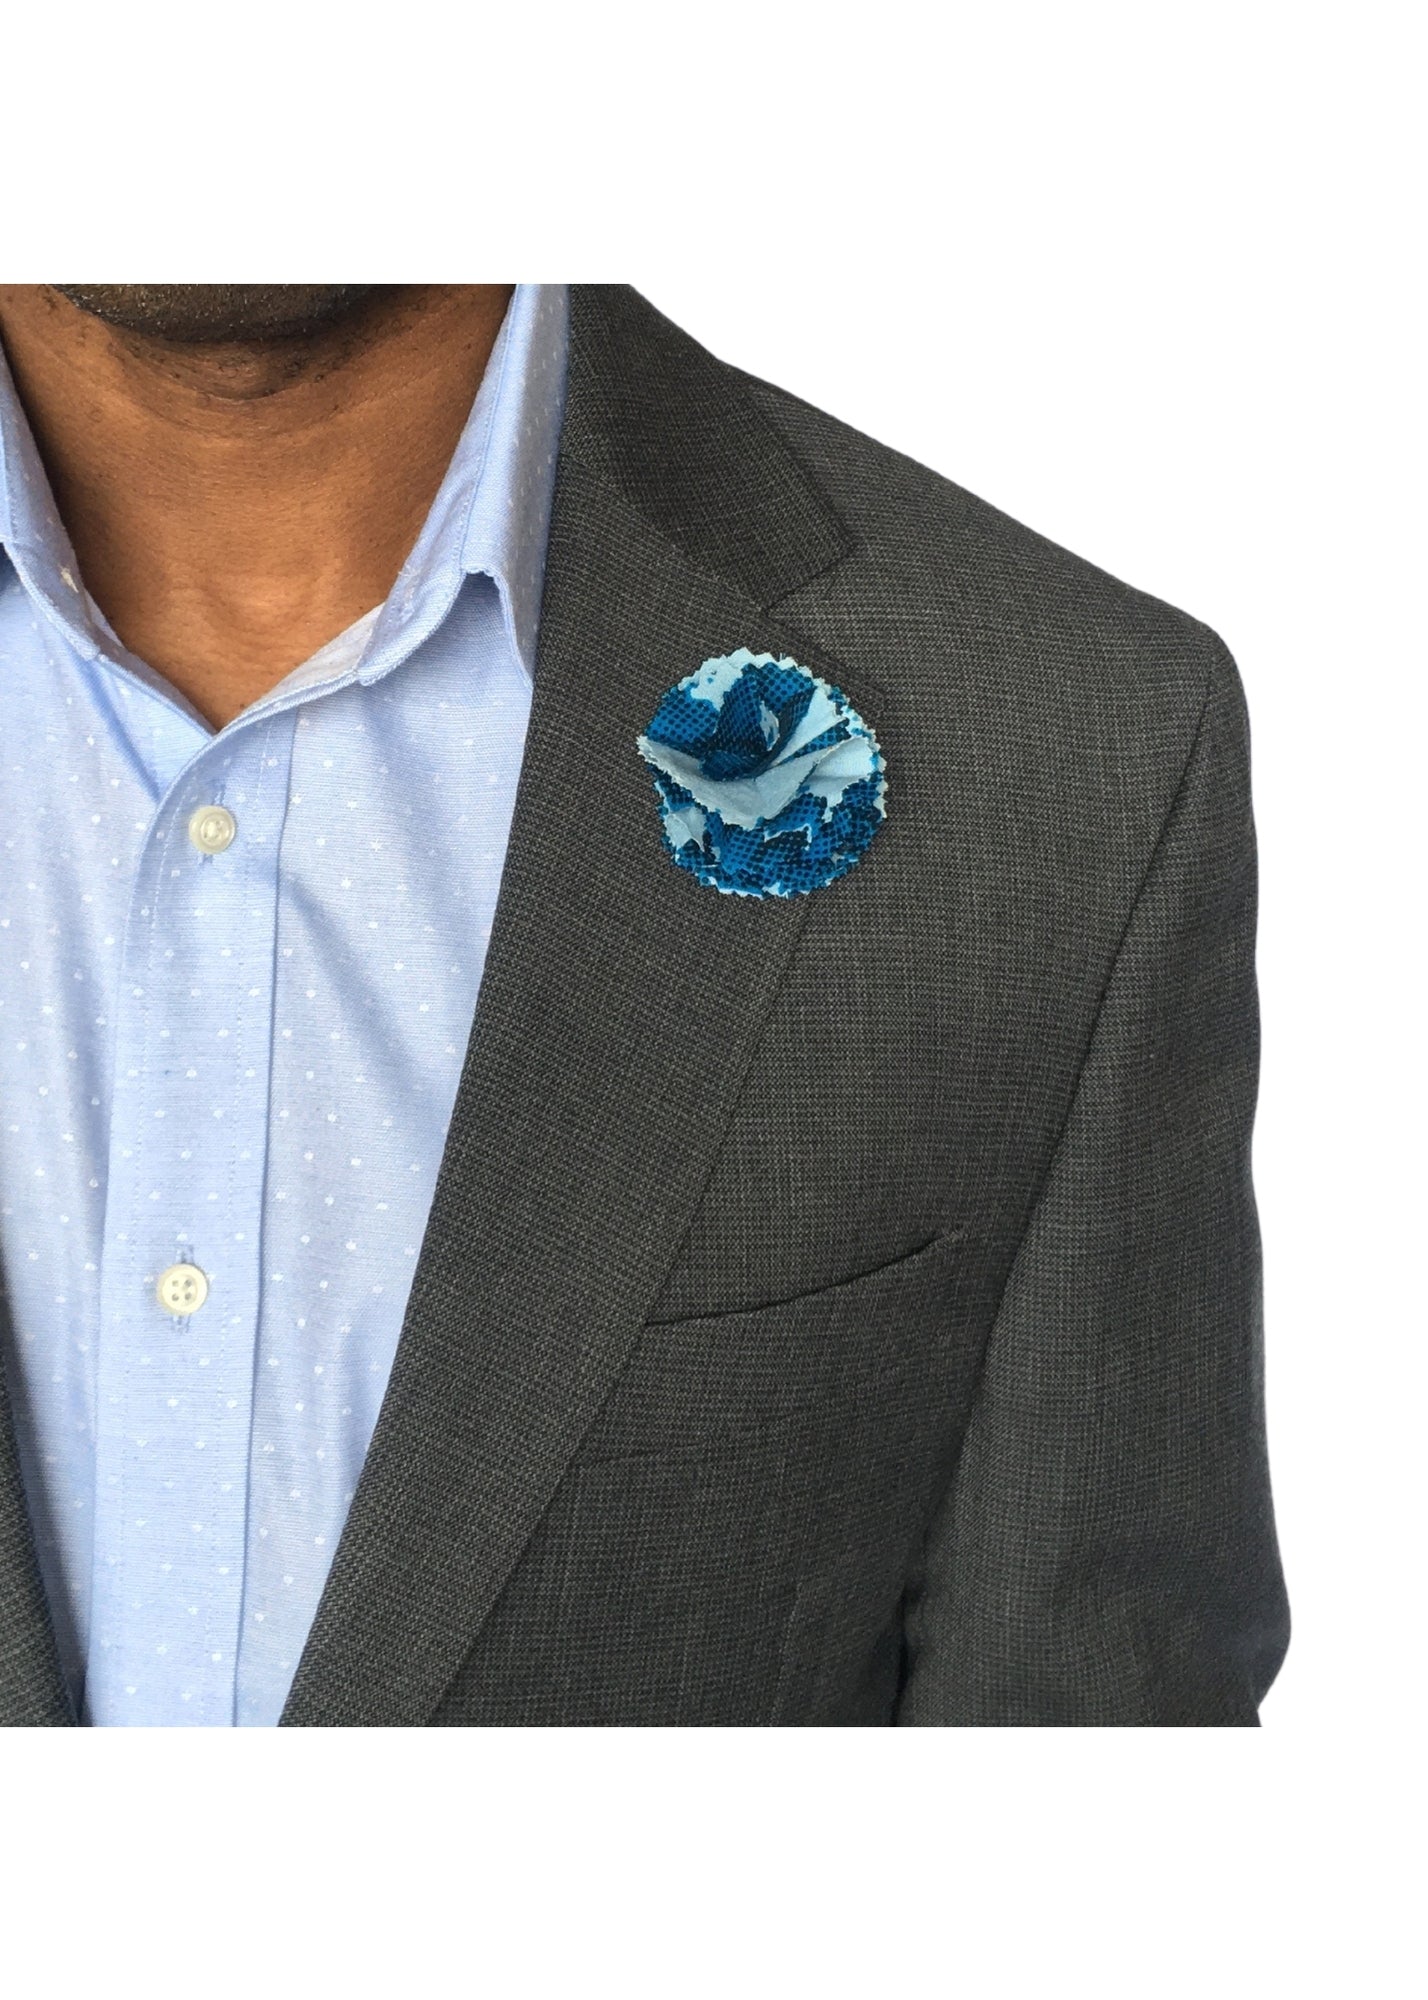 Blue and Dark Dots Lapel Pin in African Print | Contemporary and Colorful Ensemble